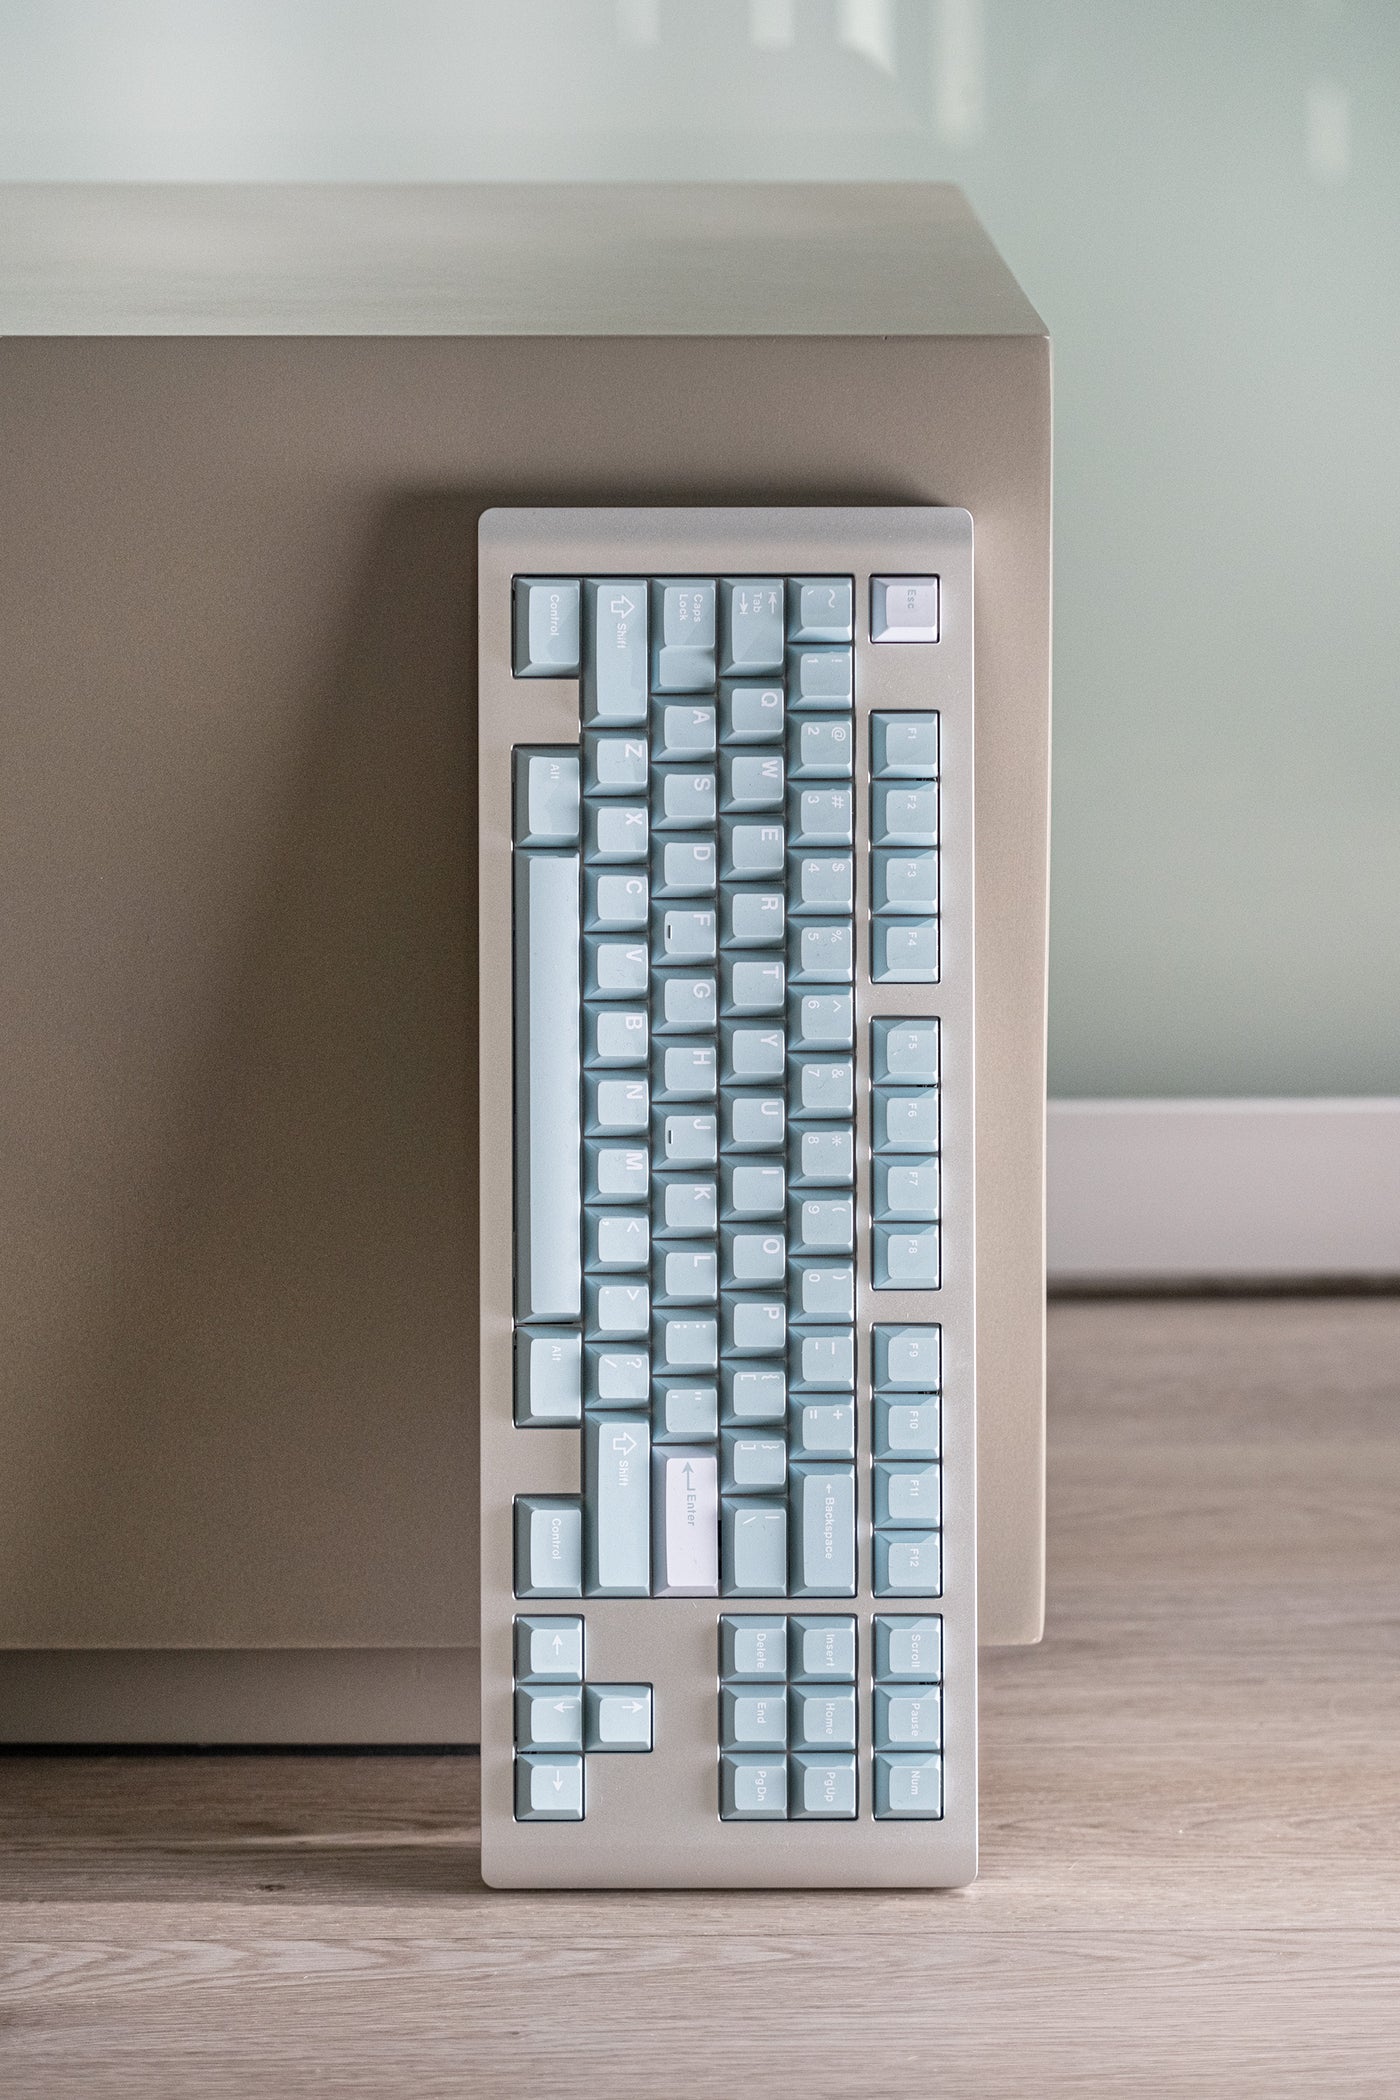 [In-stock] Spectacle80 Mechanical Keyboard Kit